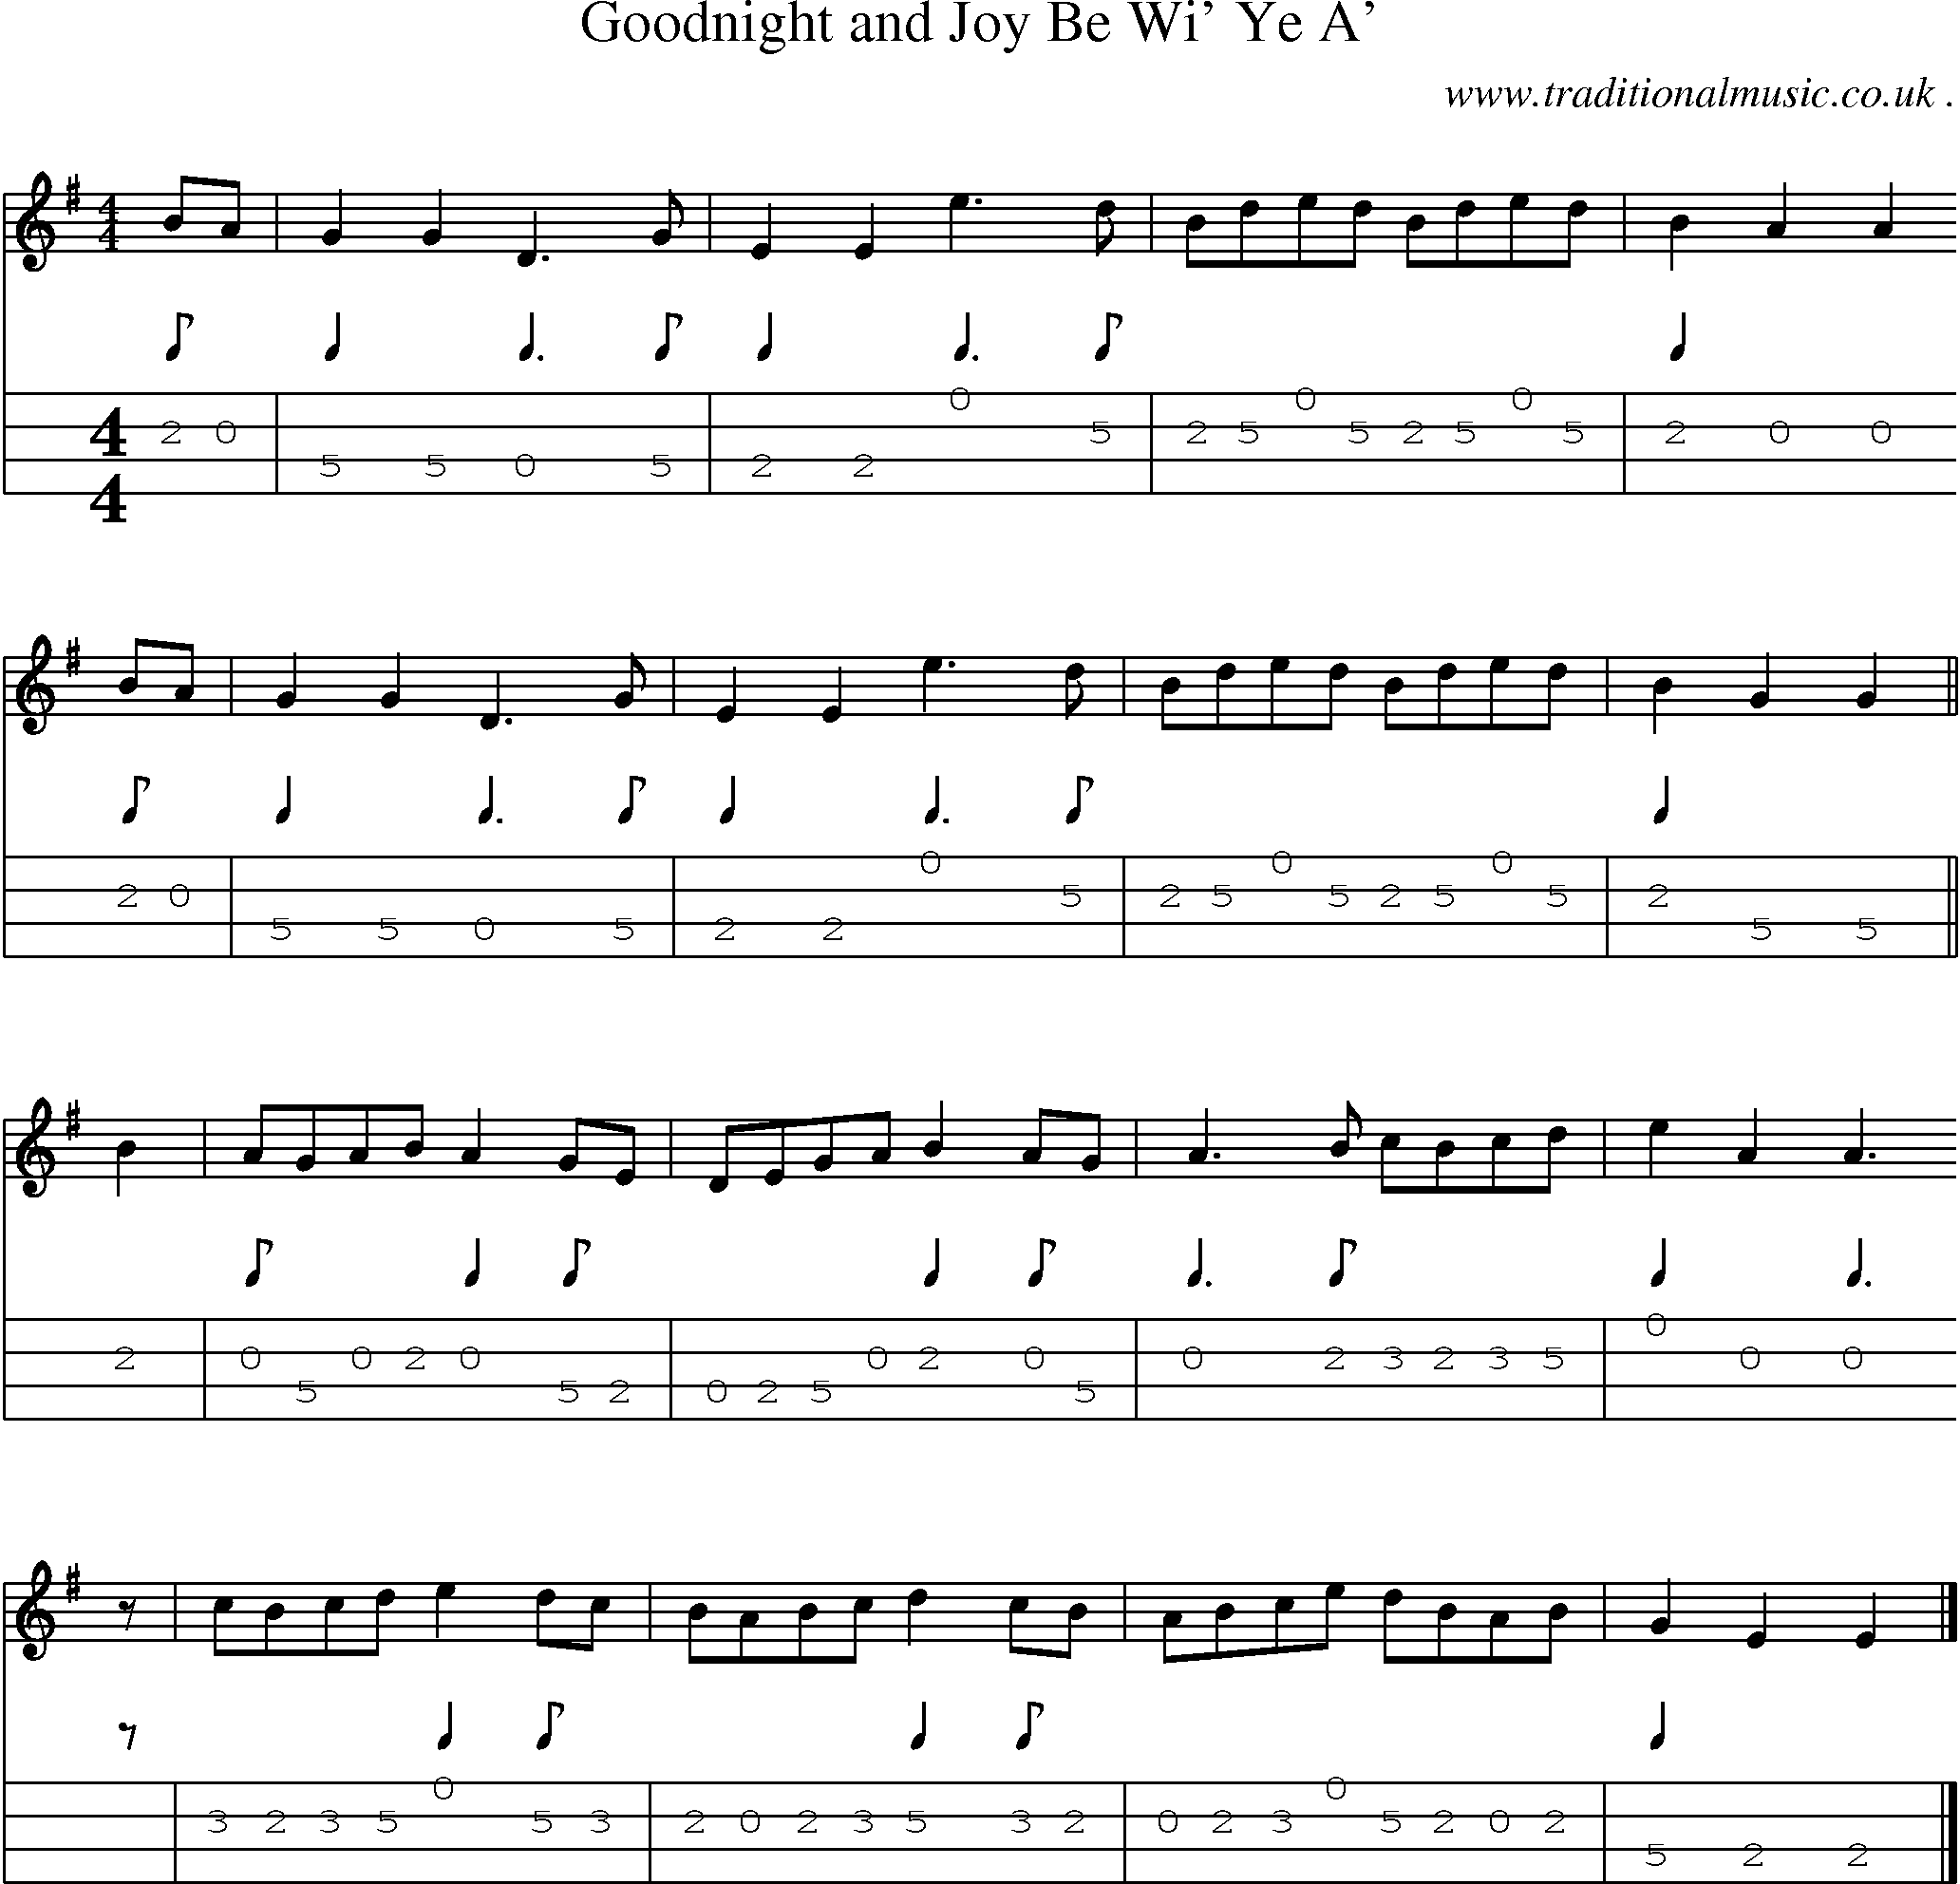 Sheet-music  score, Chords and Mandolin Tabs for Goodnight And Joy Be Wi Ye A